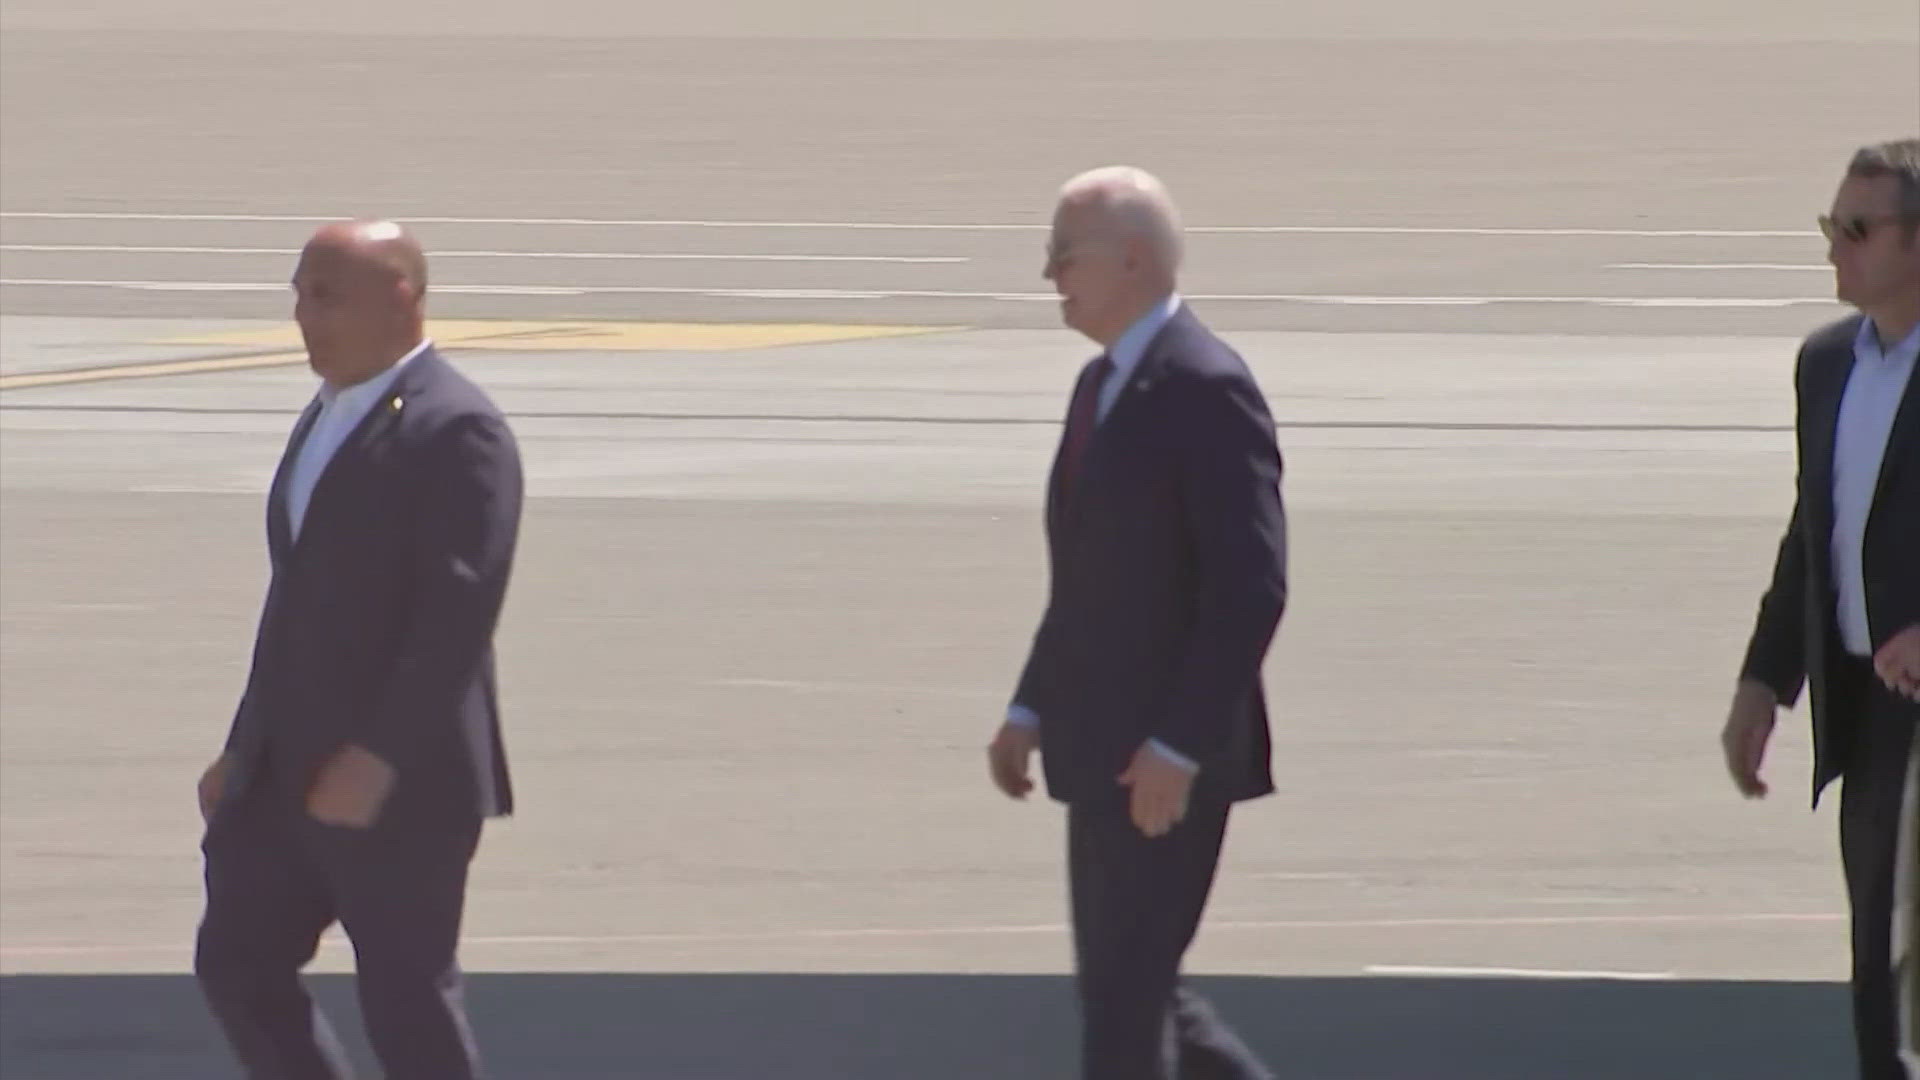 Biden departed from the Emerald City on Saturday afternoon after attending a campaign event in Medina.